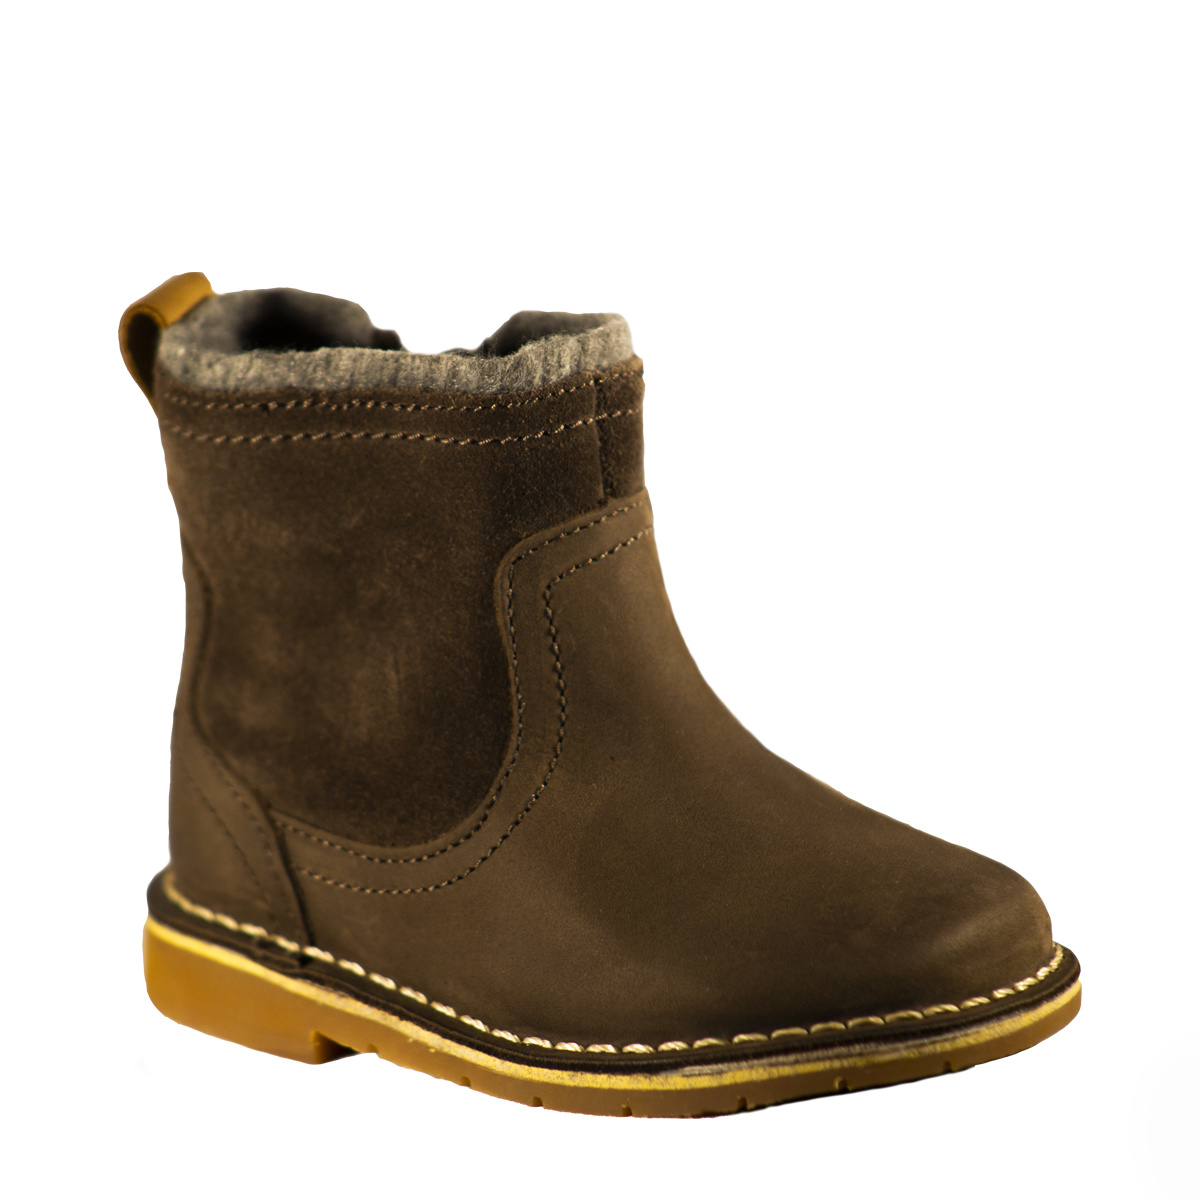 Clarks Comet Frost Brown Leather